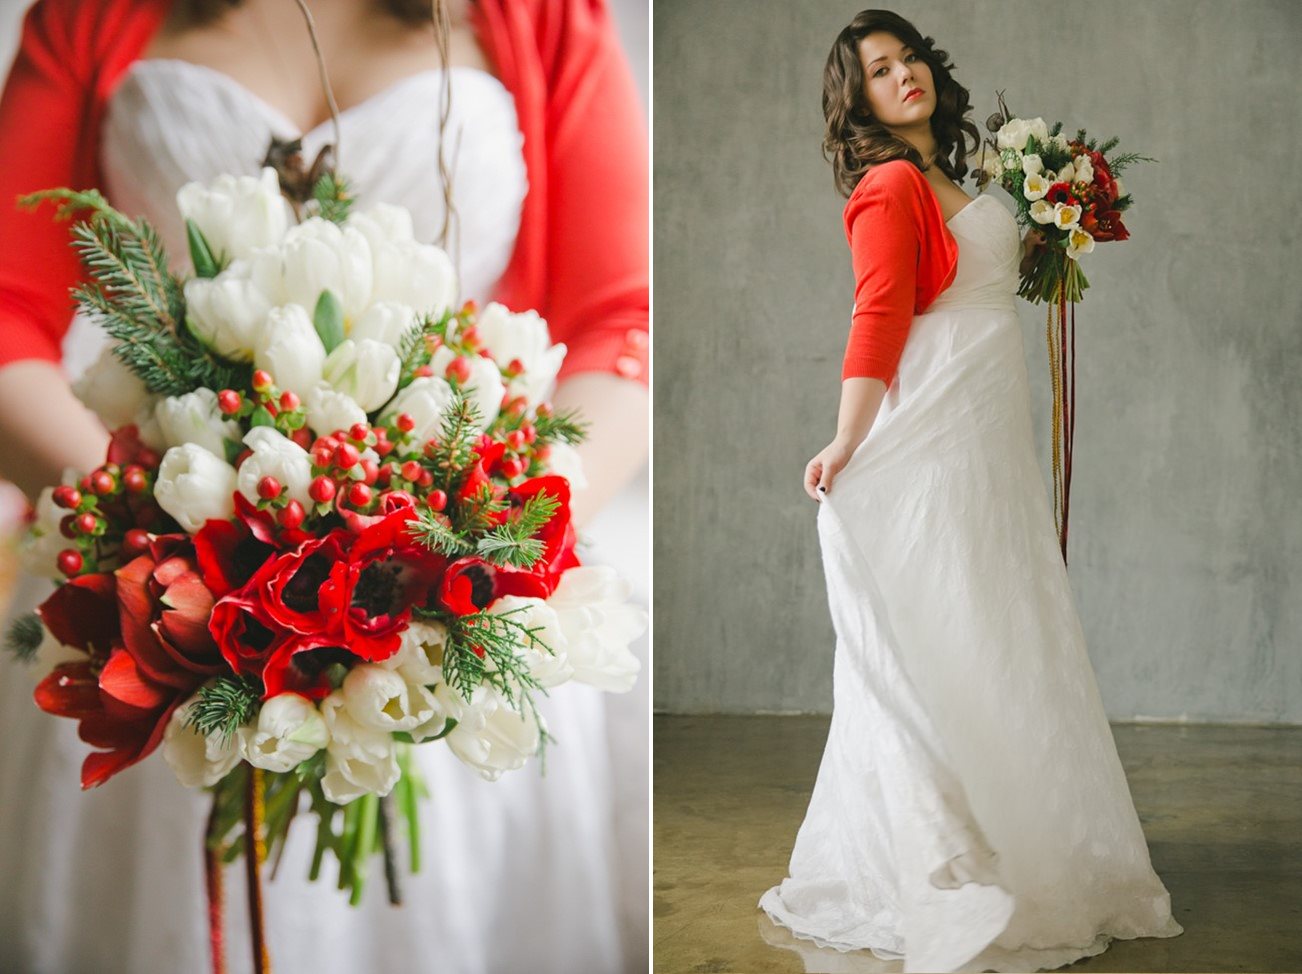 Christmas Bride - A Cosy Christmas Wedding Inspiration Shoot in Red, Green & White from WarmPhoto